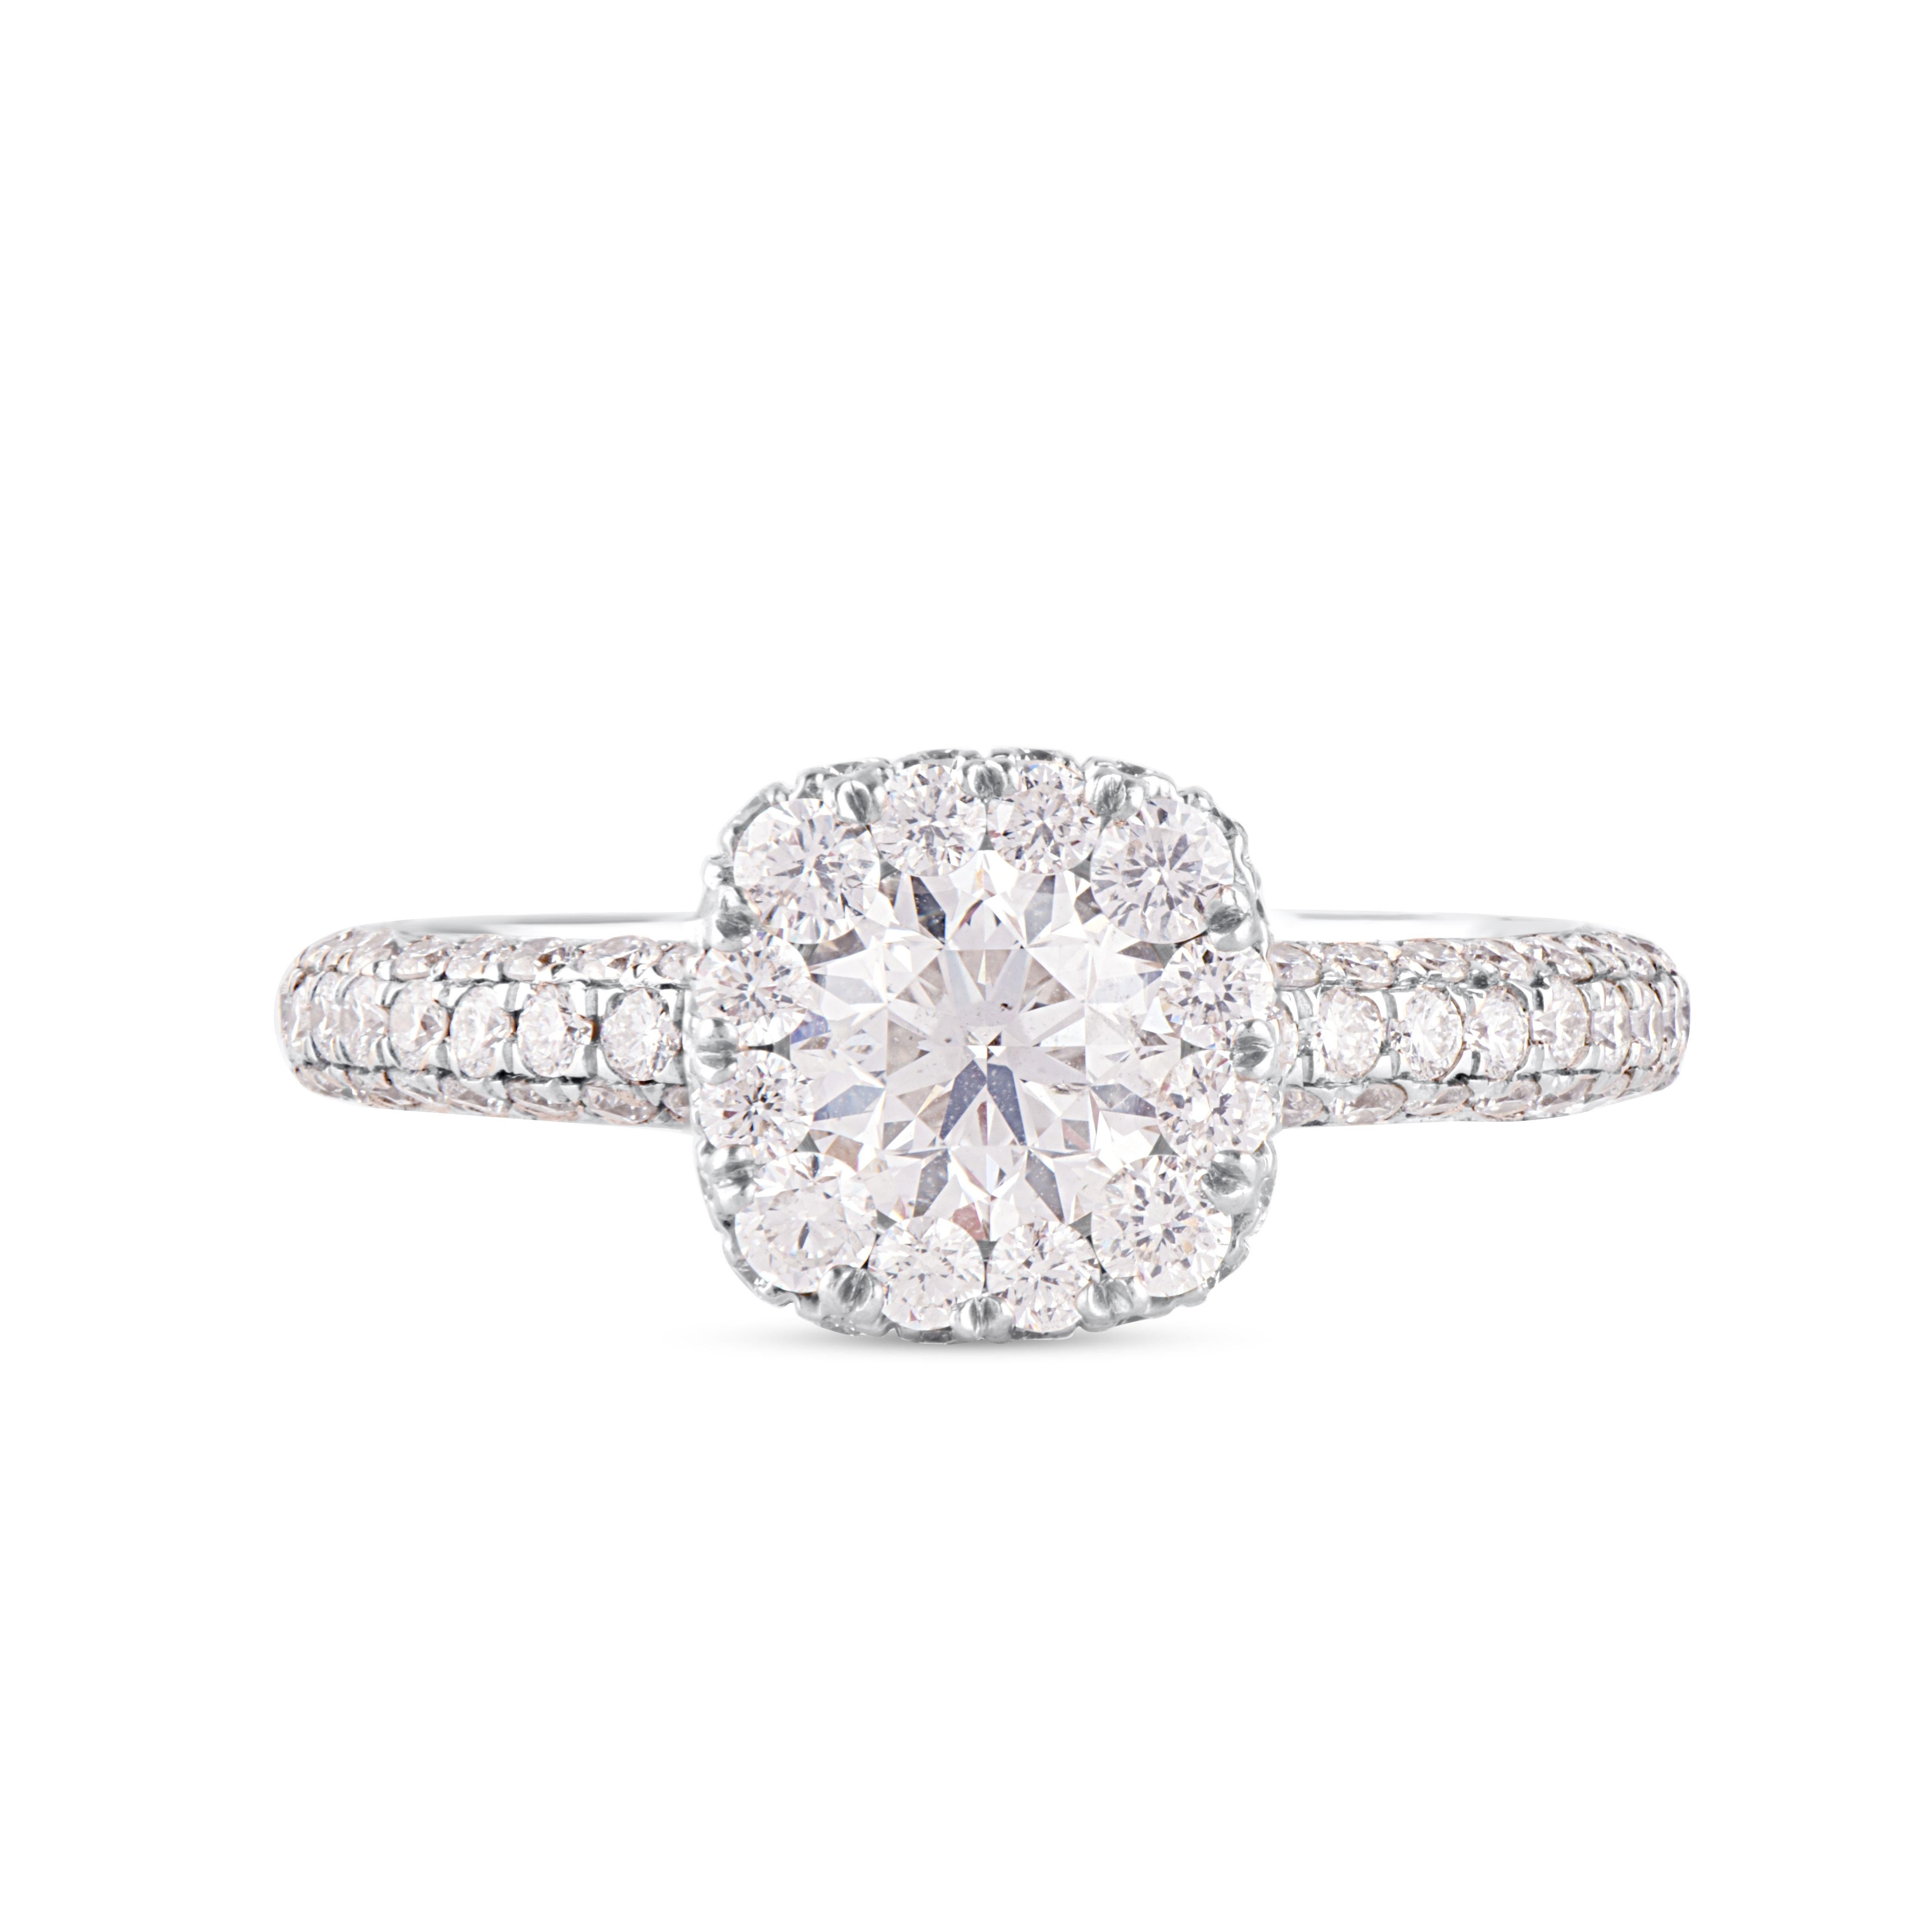 Truly exquisite, this diamond anniversary ring is sure to be admired for the inherent classic beauty and elegance within its design. These ring is crafted in 14KT white gold, and studded with 99 single cut and brilliant cut natural diamonds in prong